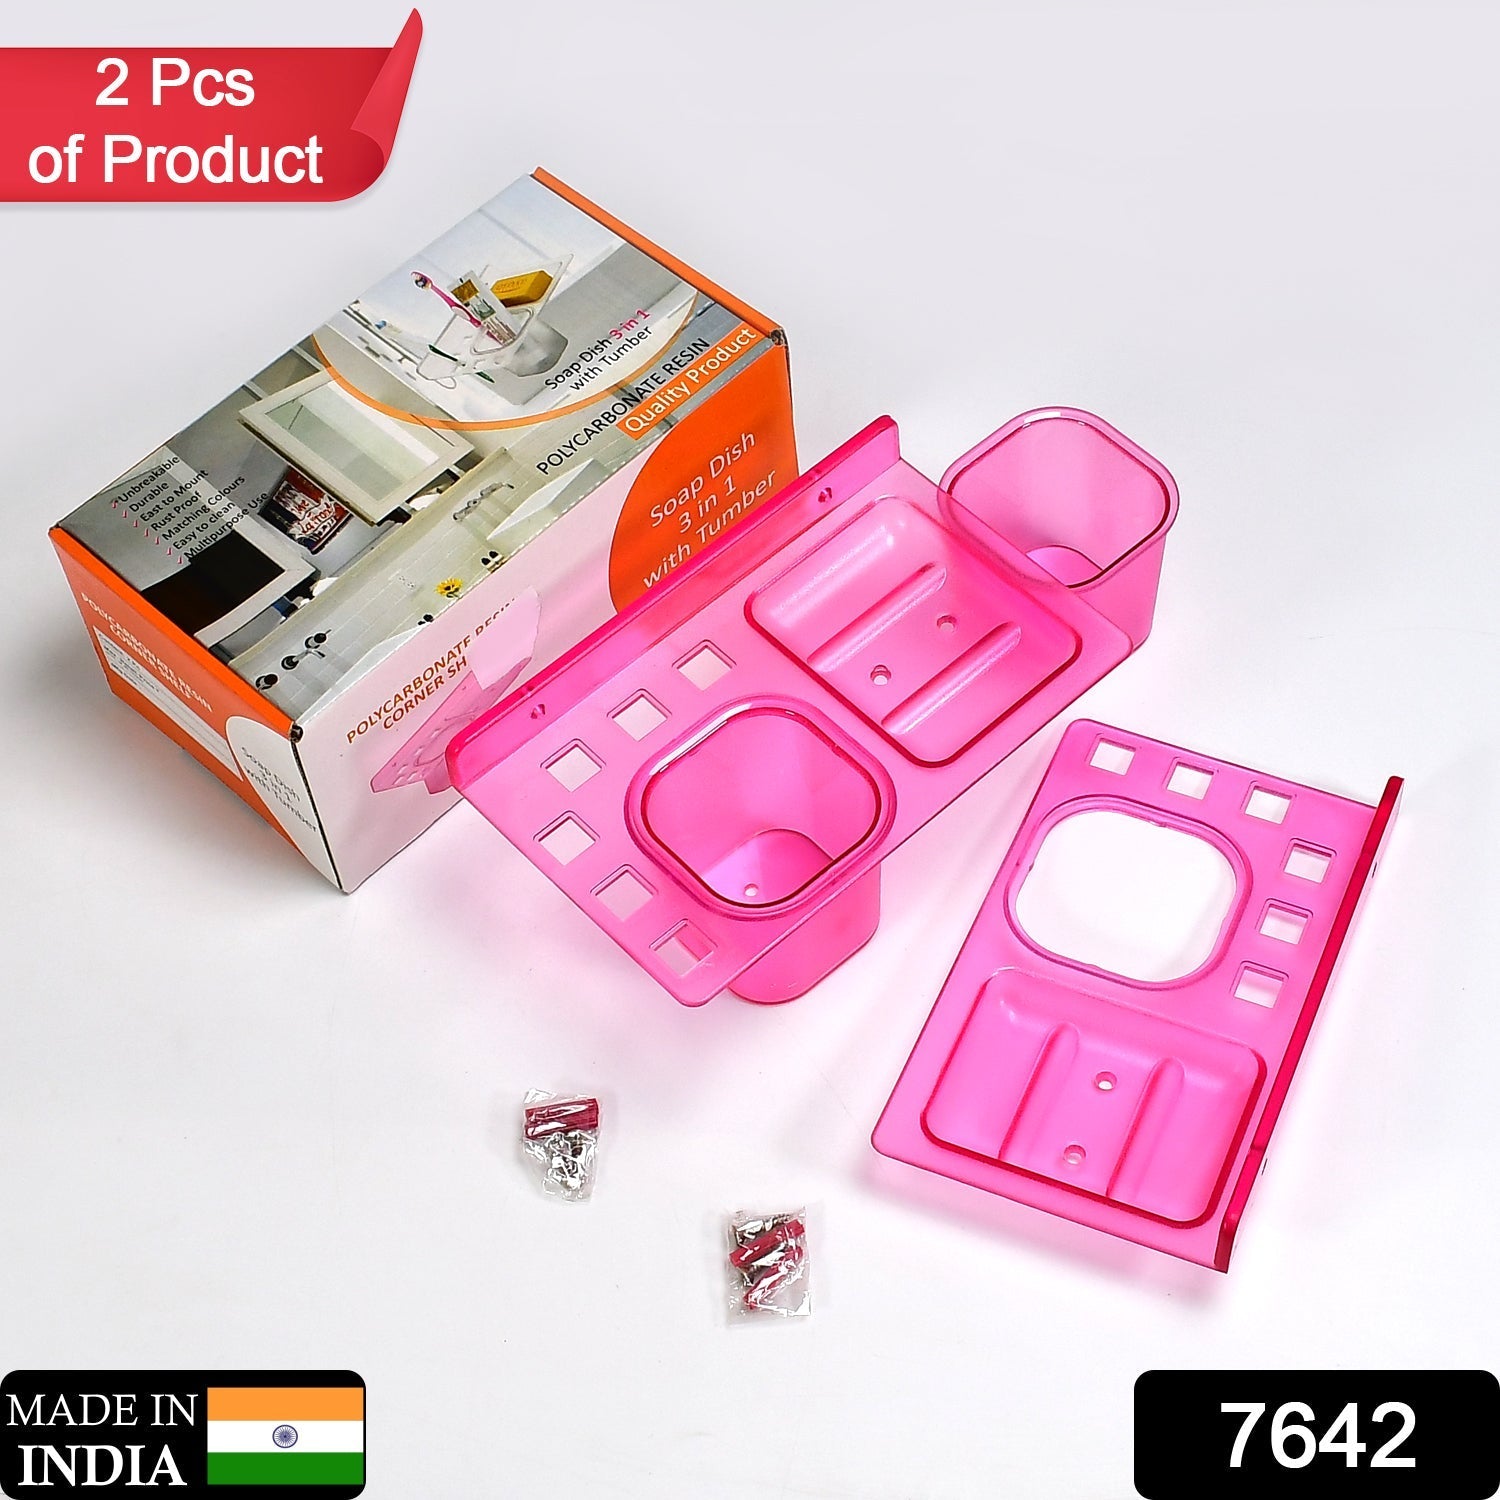 7642 Shop a wide range of bathroom ware products from Pure Source India, in this pack there coming 3in1 glass soap dish, which is suitable to use on stand .It is having unique design of products will enhance beauty of your bath room. DeoDap